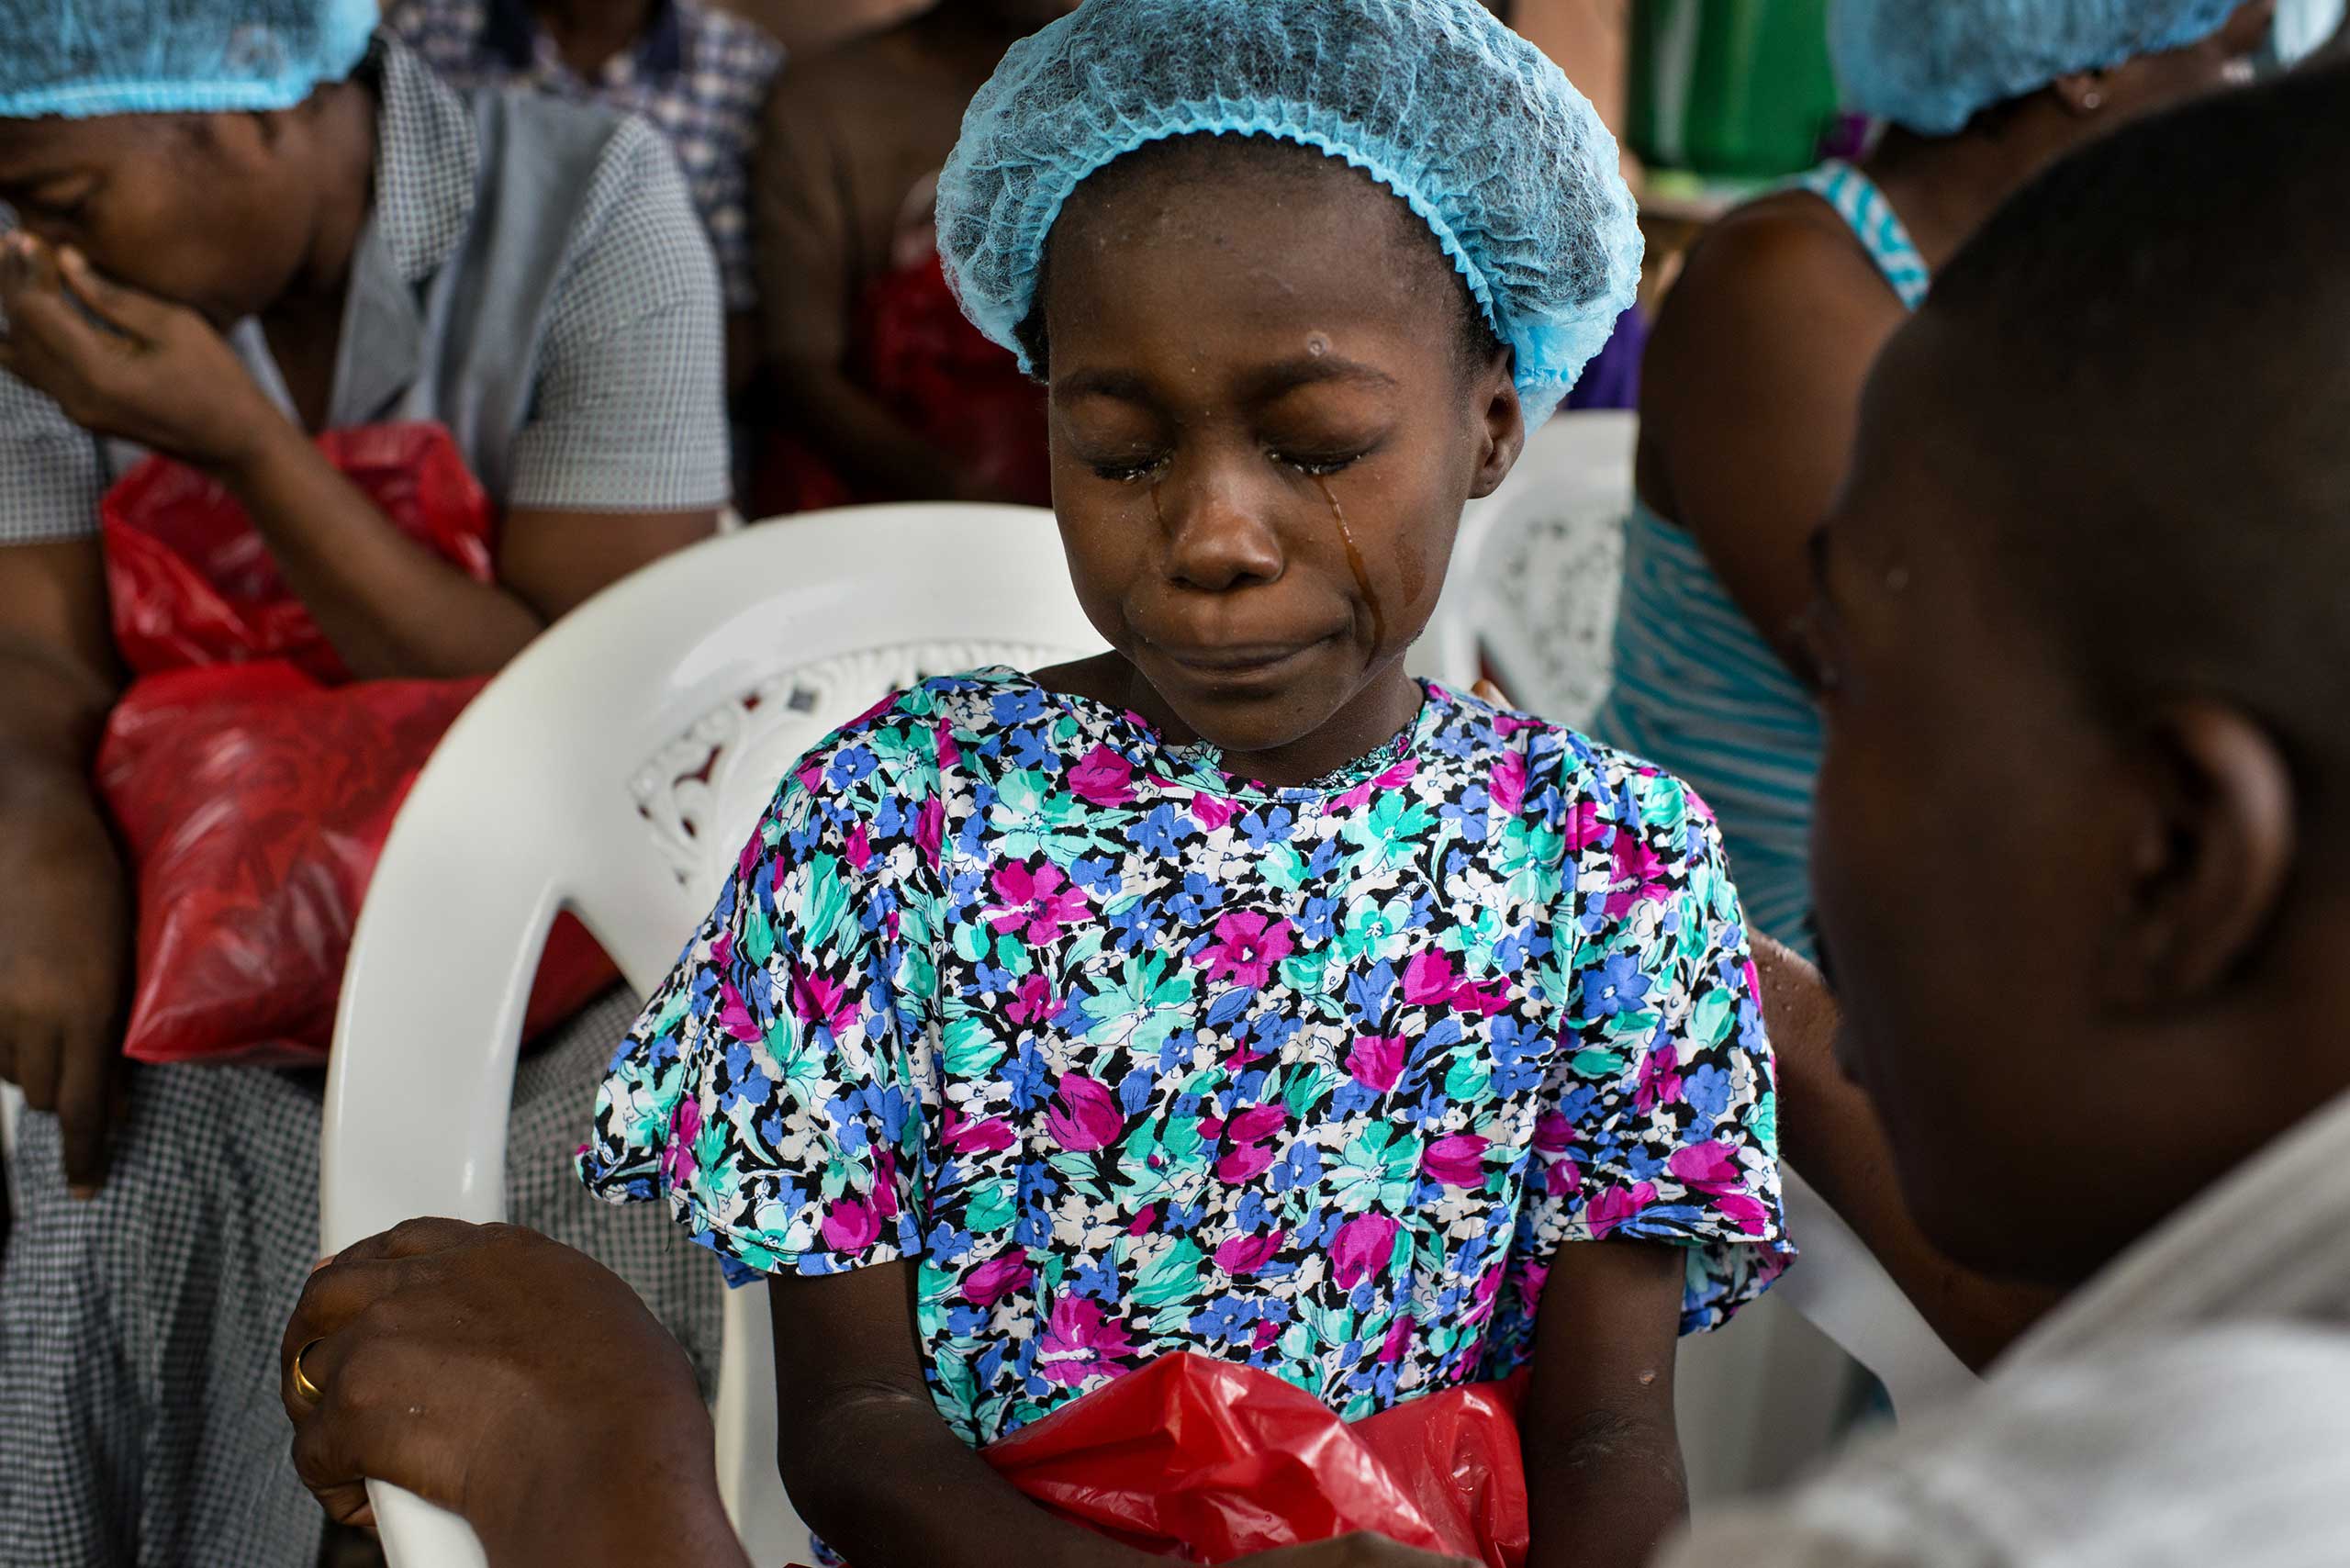 The following photographs are from Michel du Cille's assignment in Liberia, Sept.-Nov. 2014 Esther Tokpah, 11 an orphan, weeps as Dr. Jerry Brown tries to console her before she was released from care on Sept. 24, 2014 in Monrovia, Liberia.